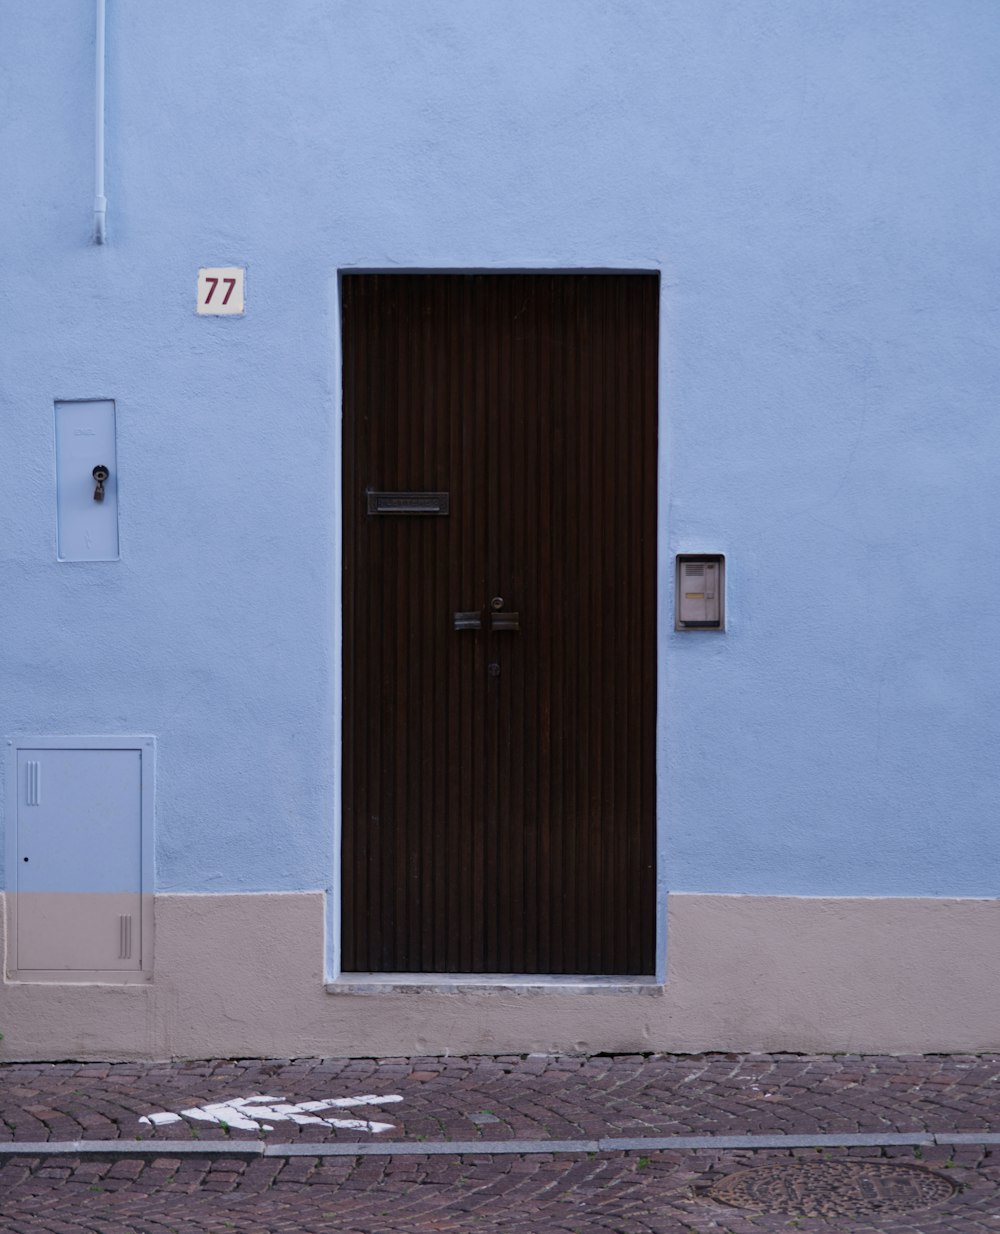 a blue building with a black door and a white fire hydrant